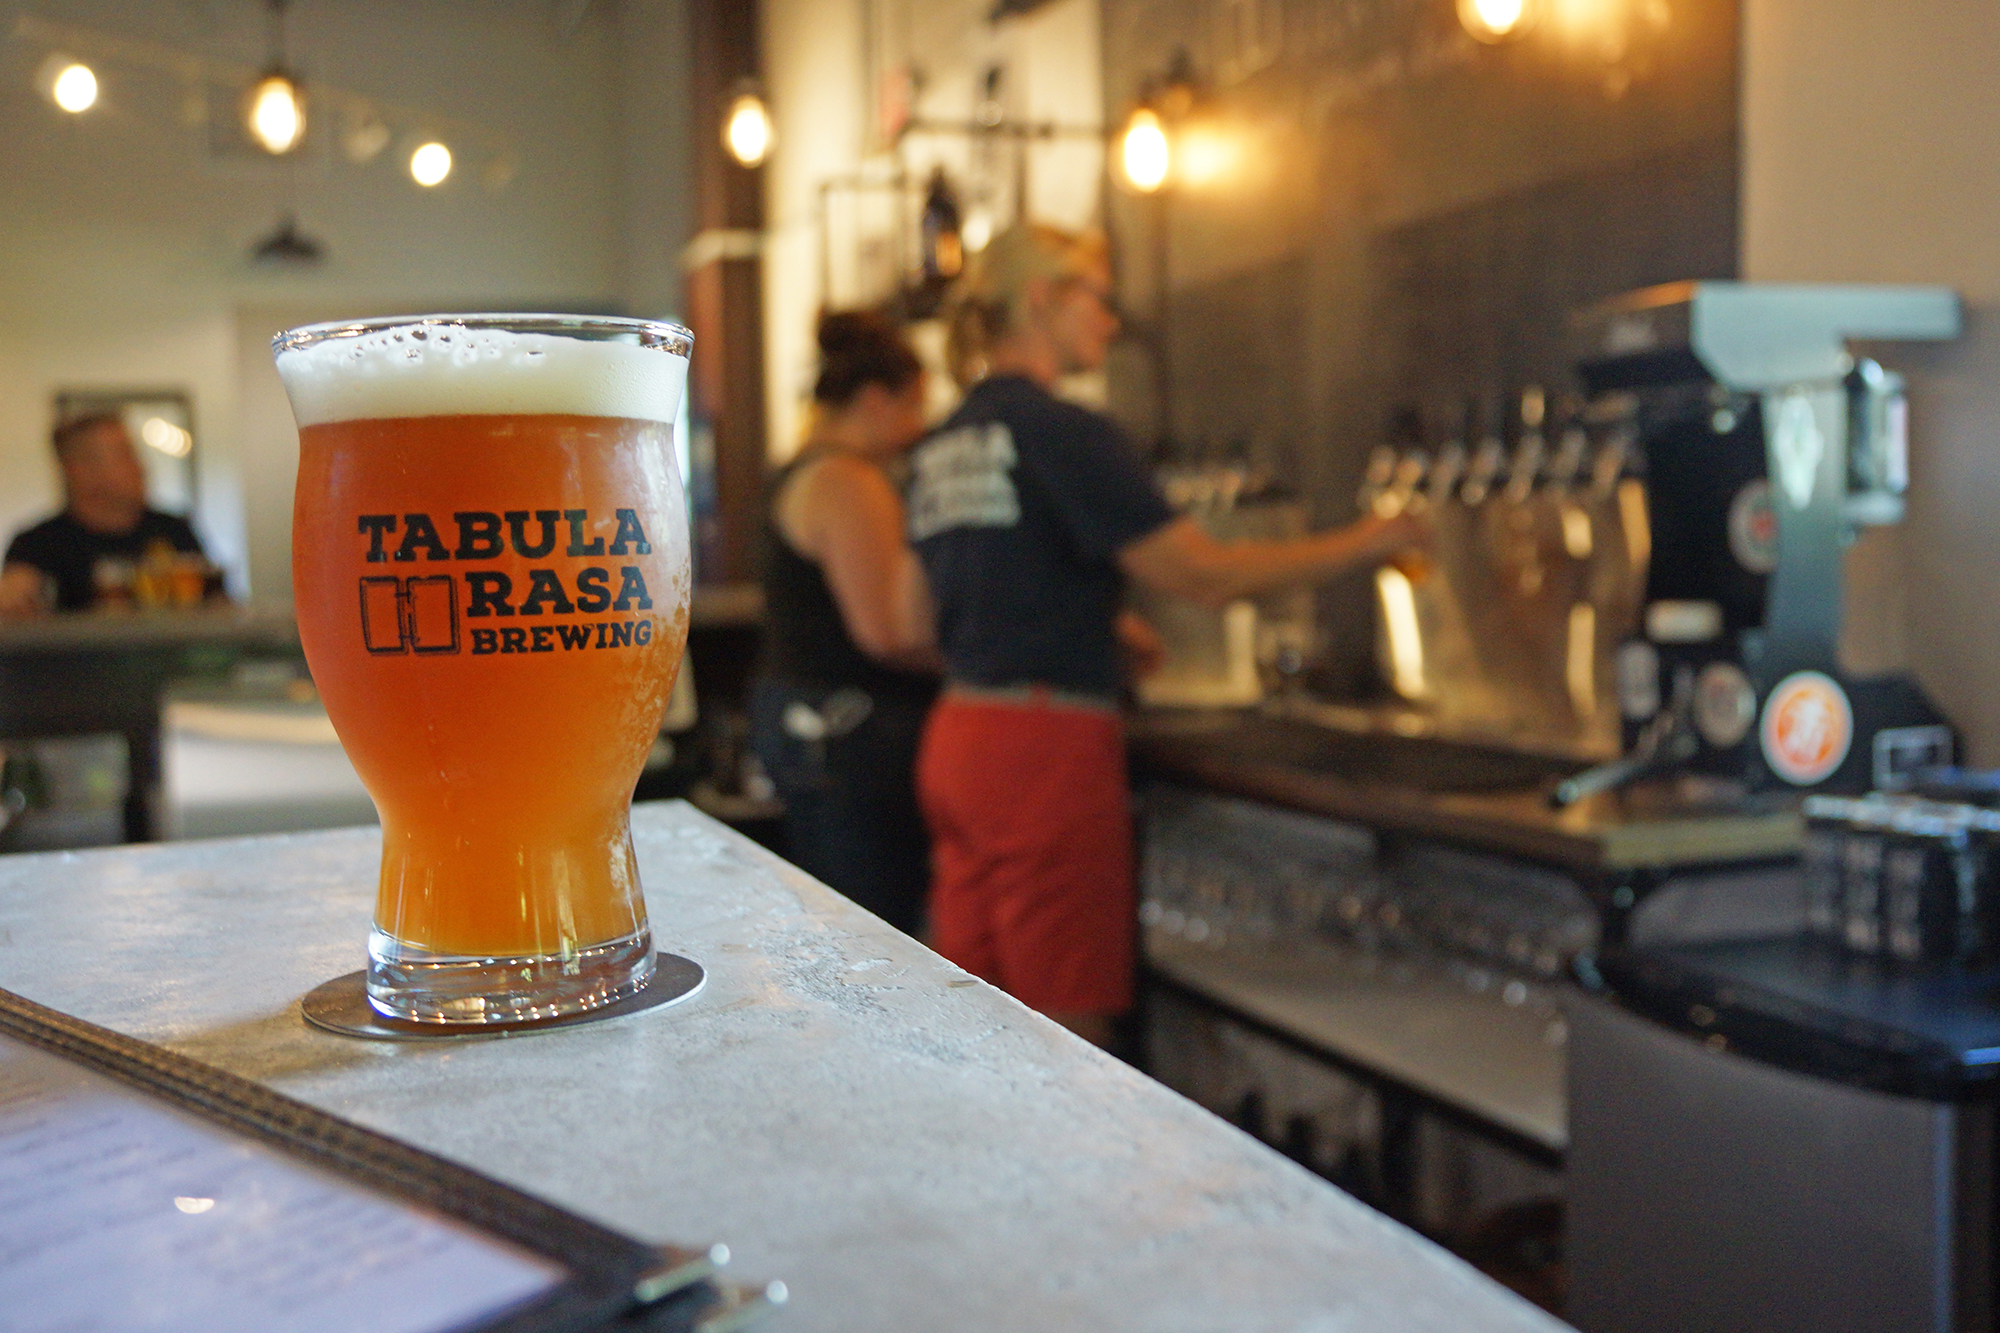 Randy Peterson, co-founder of Tabula Rasa Brewing, said he started the business because he and his son were passionate homebrewers.